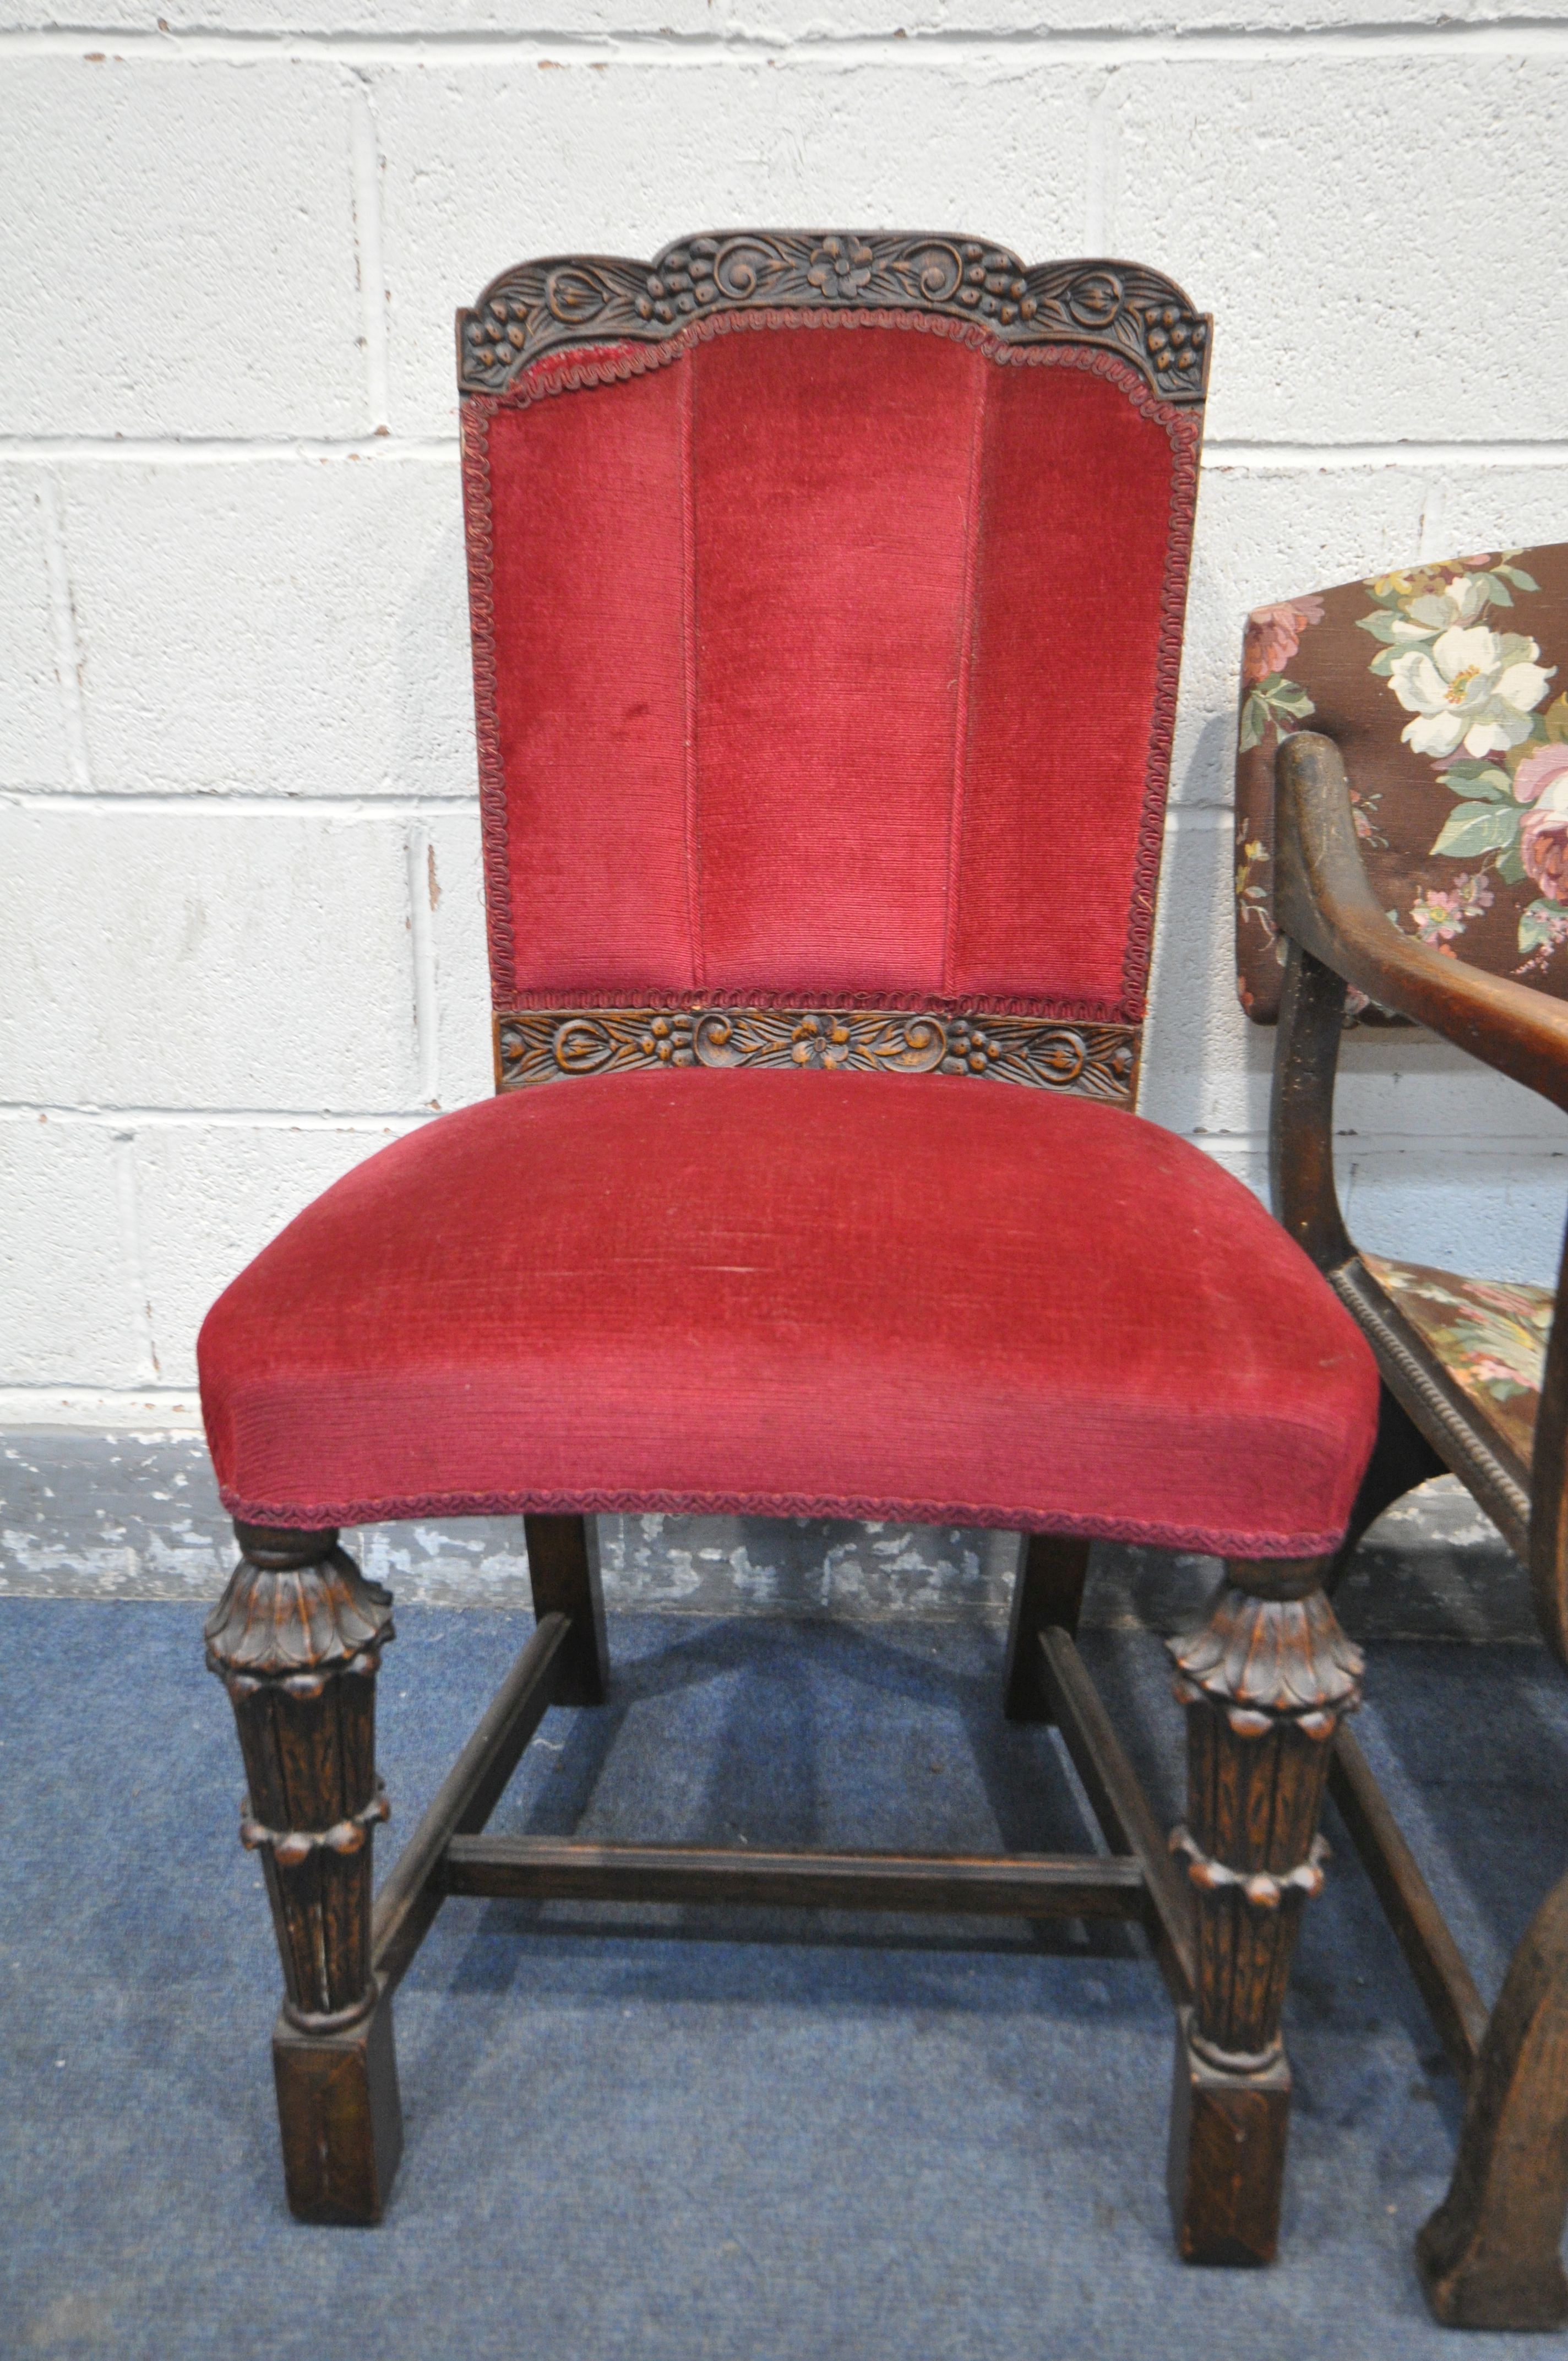 A MID CENTURY OAK CHAIR, with red upholstery, foliate carving to back rest, a concave seat, on front - Image 3 of 3